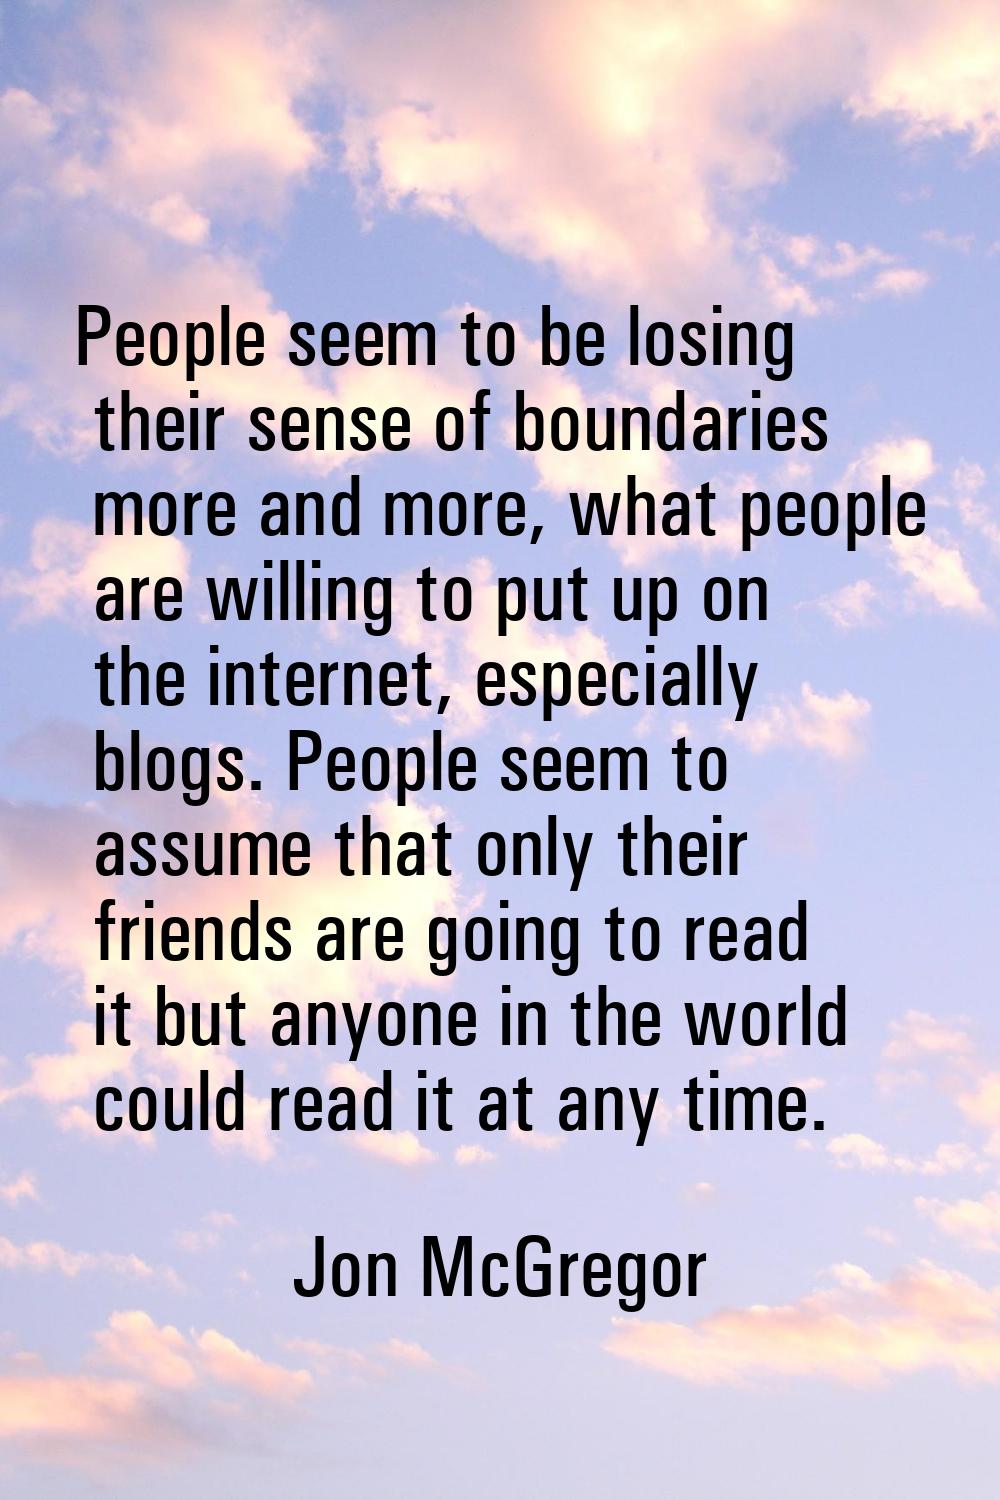 People seem to be losing their sense of boundaries more and more, what people are willing to put up